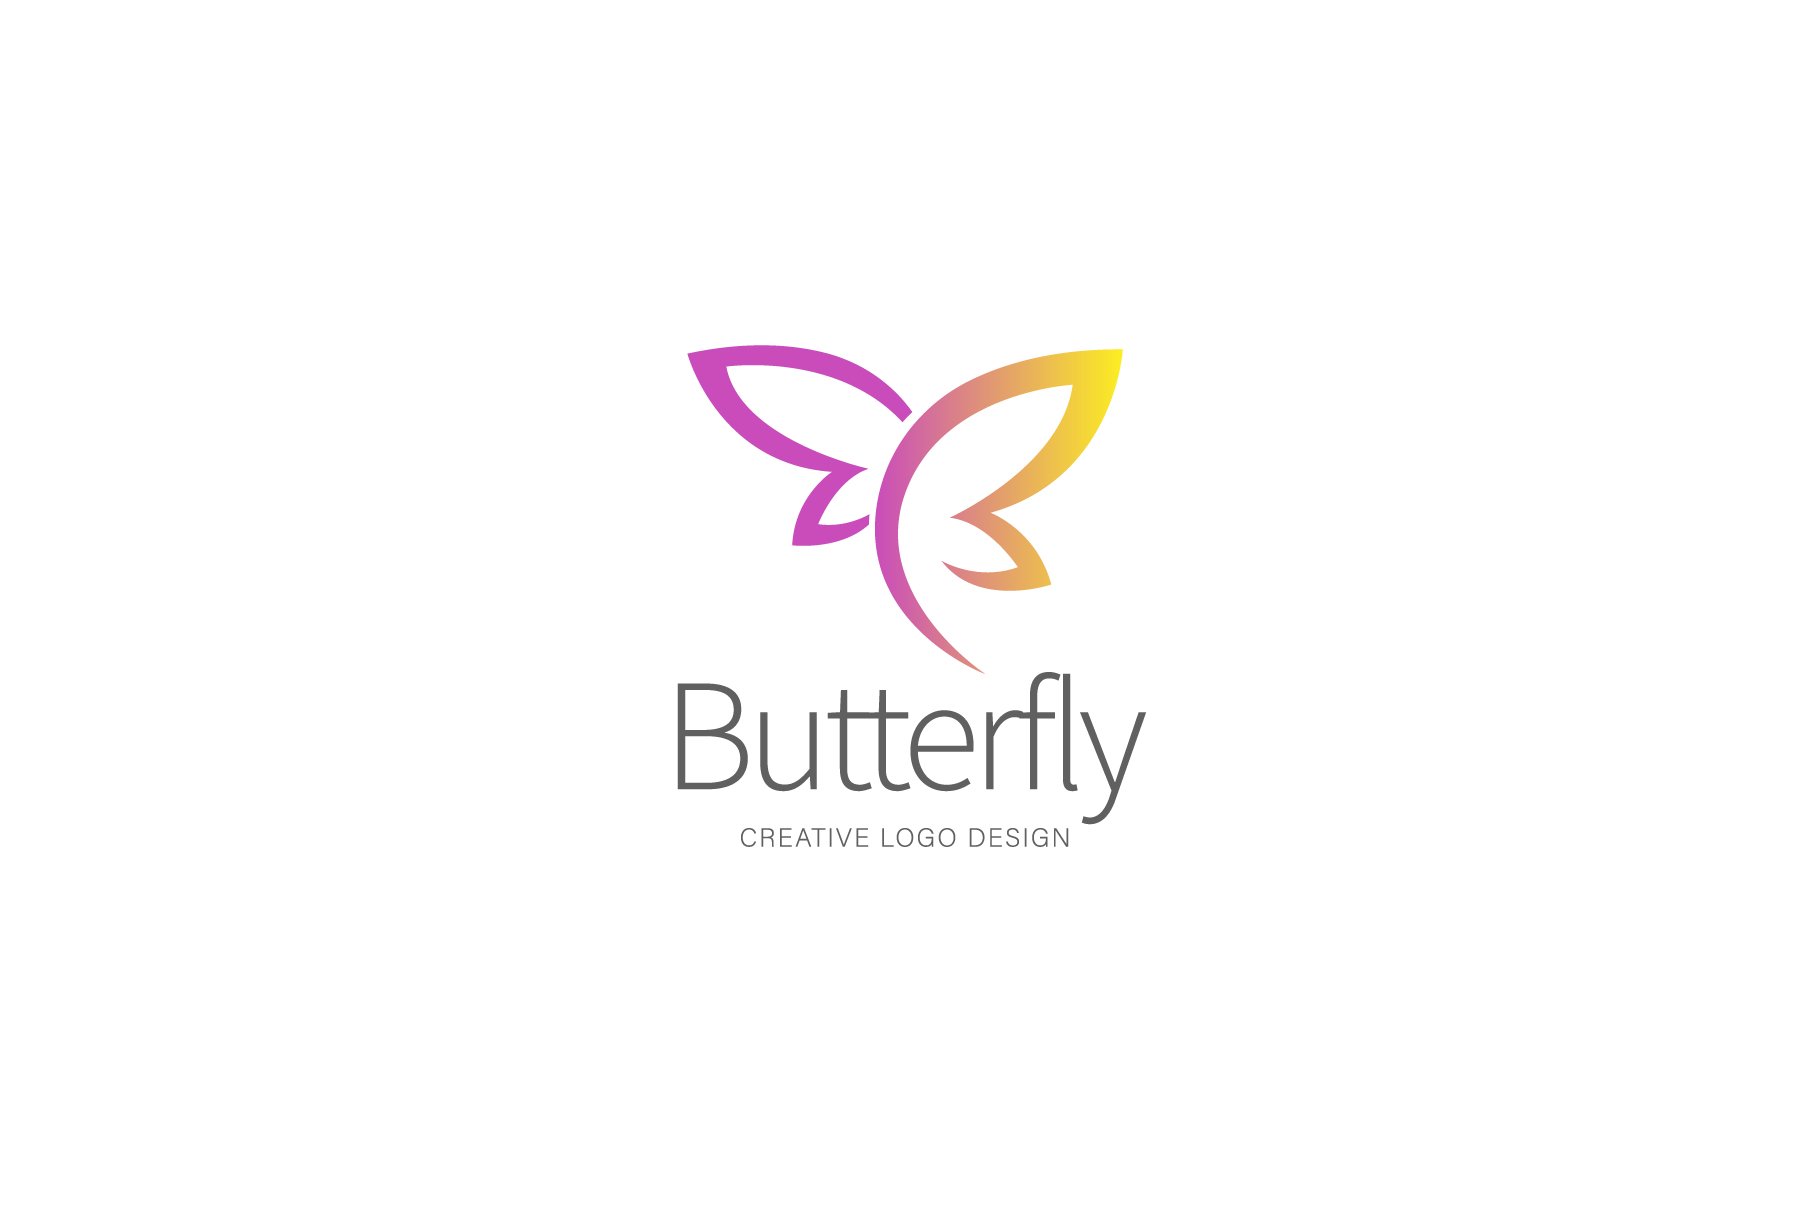 Butterfly logo cover image.